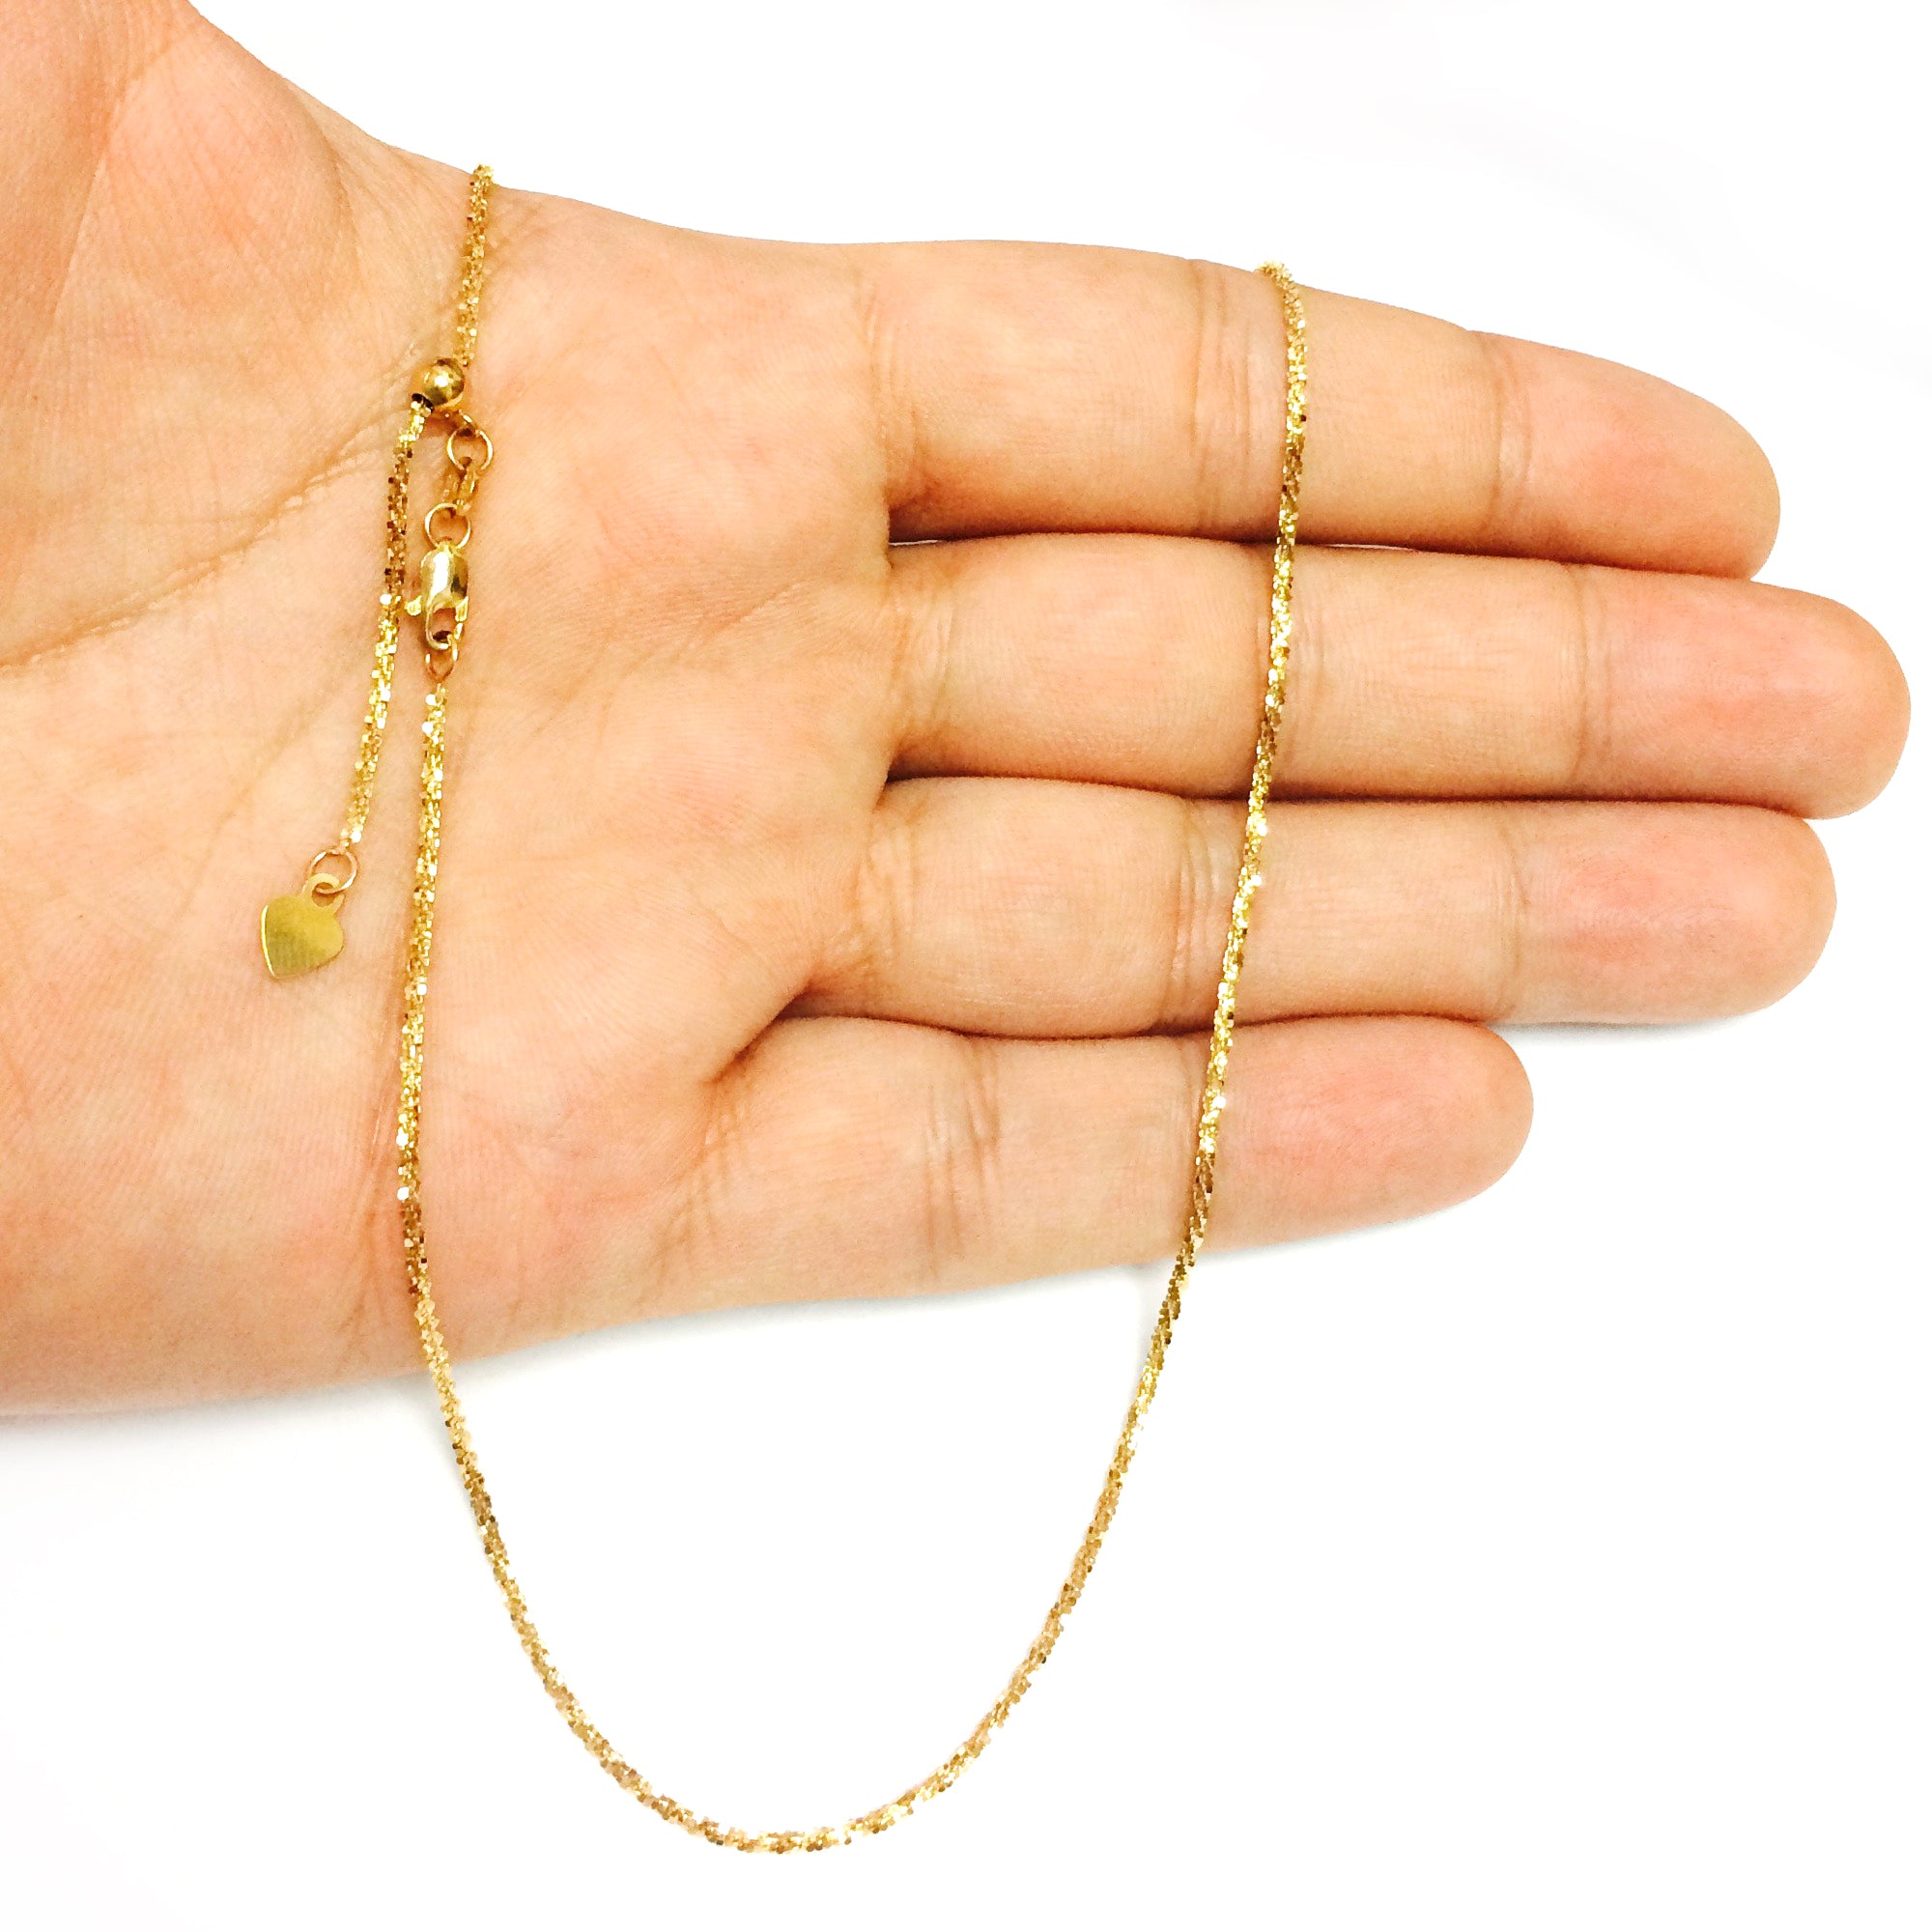 10k Yellow Gold Adjustable Sparkle Link Chain Necklace, 1.5mm, 22" fine designer jewelry for men and women